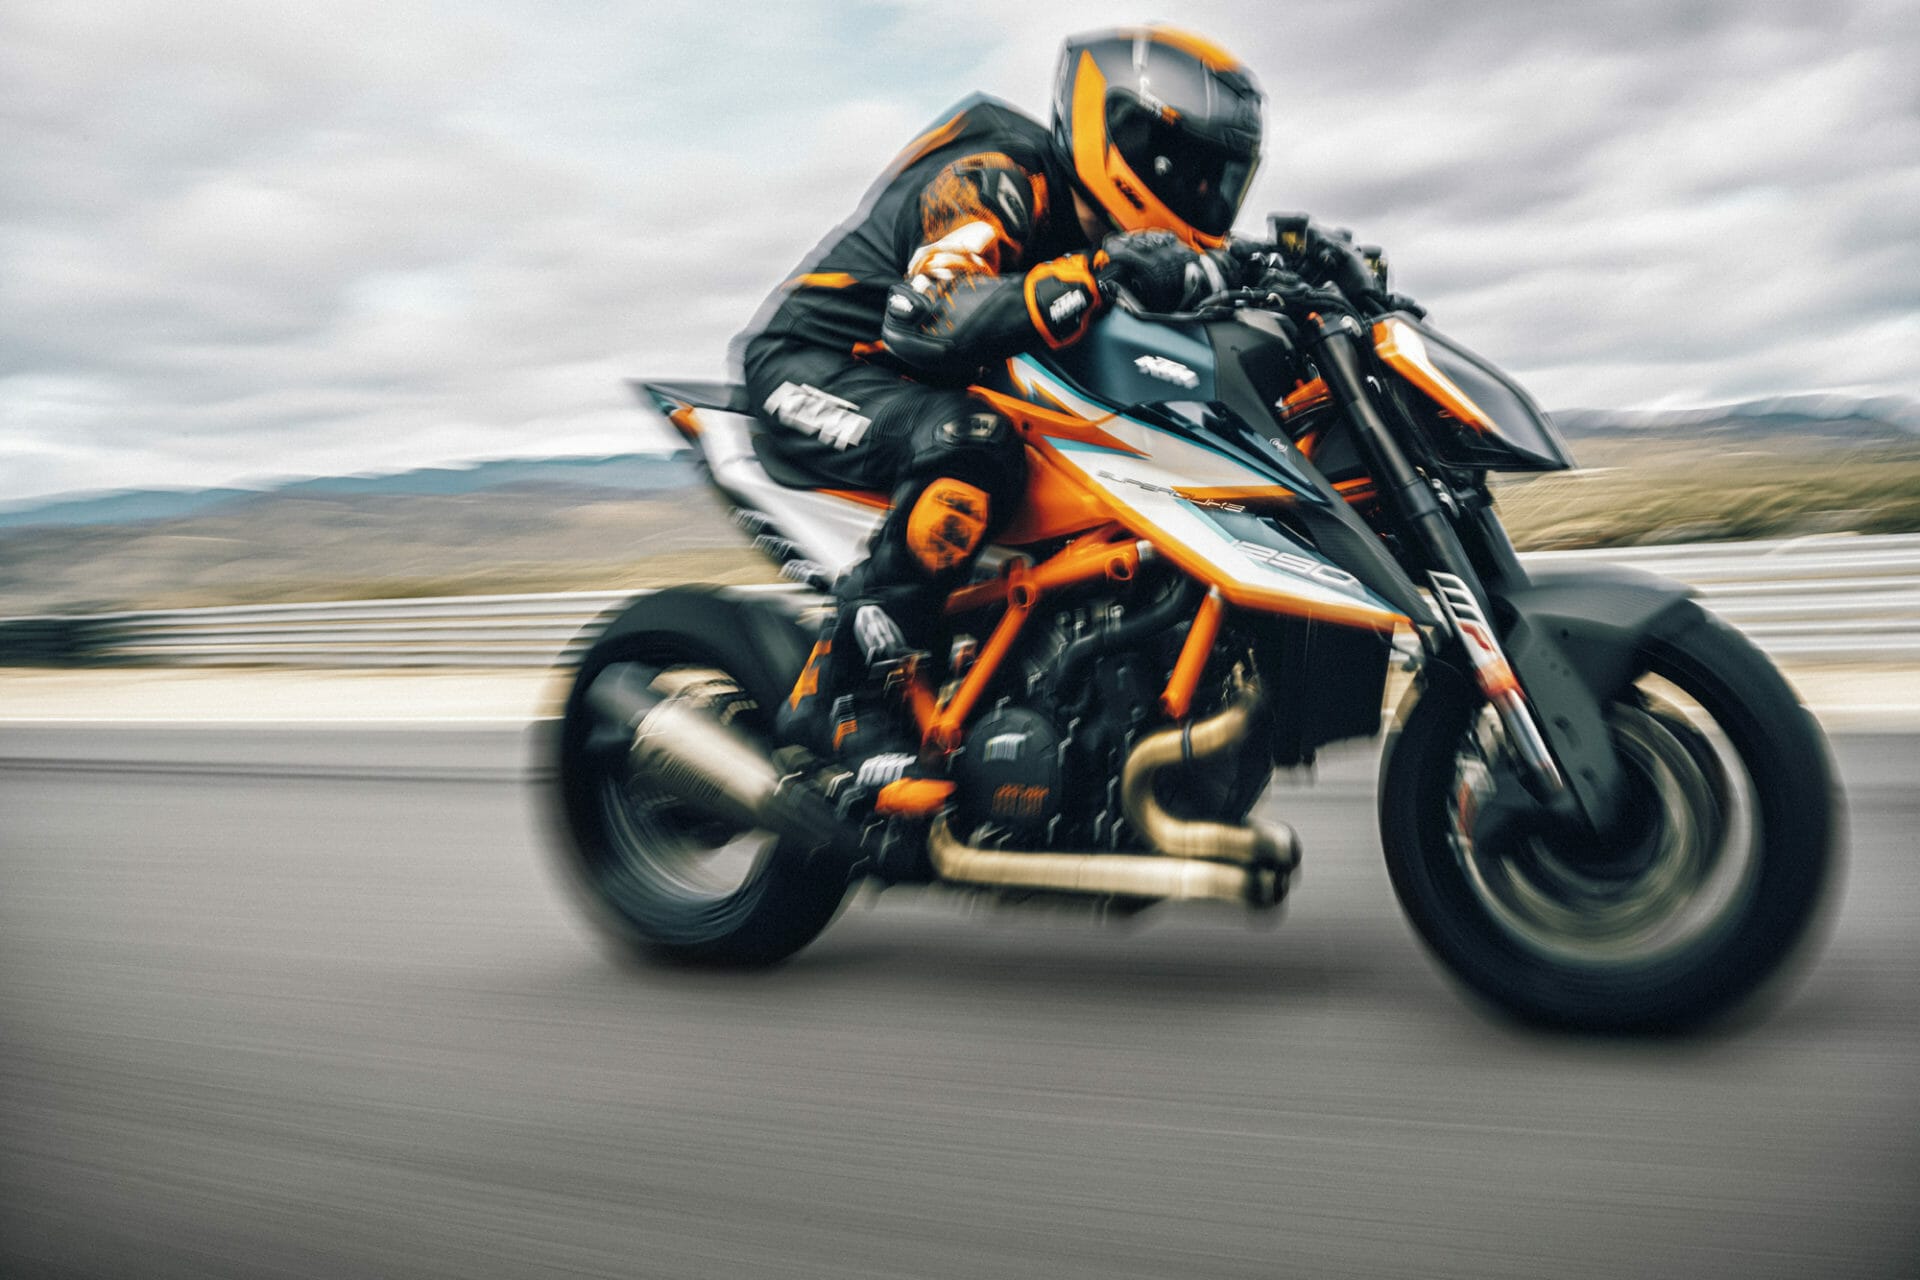 KTM 1290 Super Duke RR sold out
- also in the MOTORCYCLES.NEWS APP